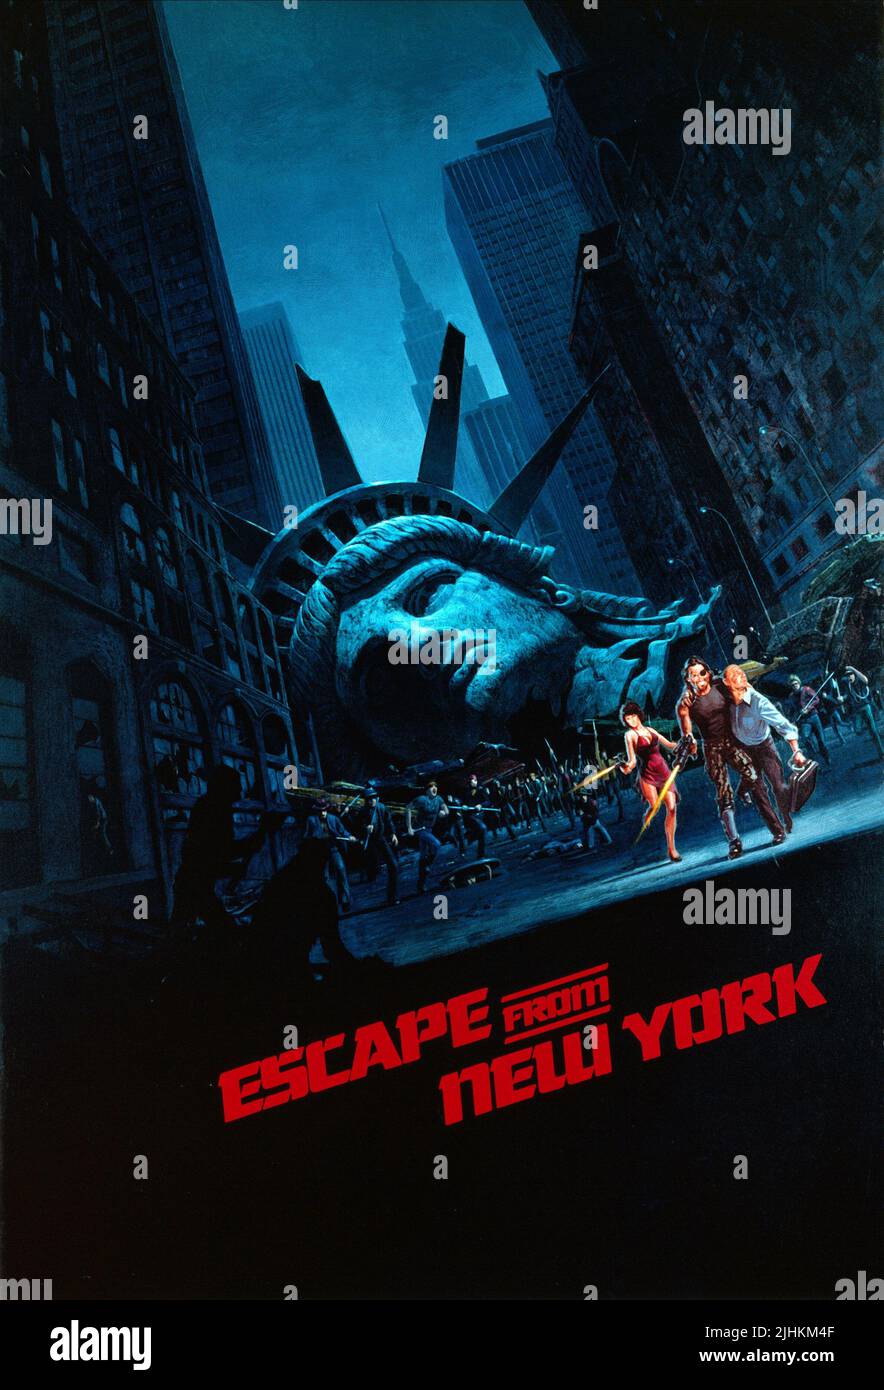 ADRIENNE BARBEAU, KURT RUSSELL MOVIE POSTER, ESCAPE FROM NEW YORK, 1981 Stock Photo